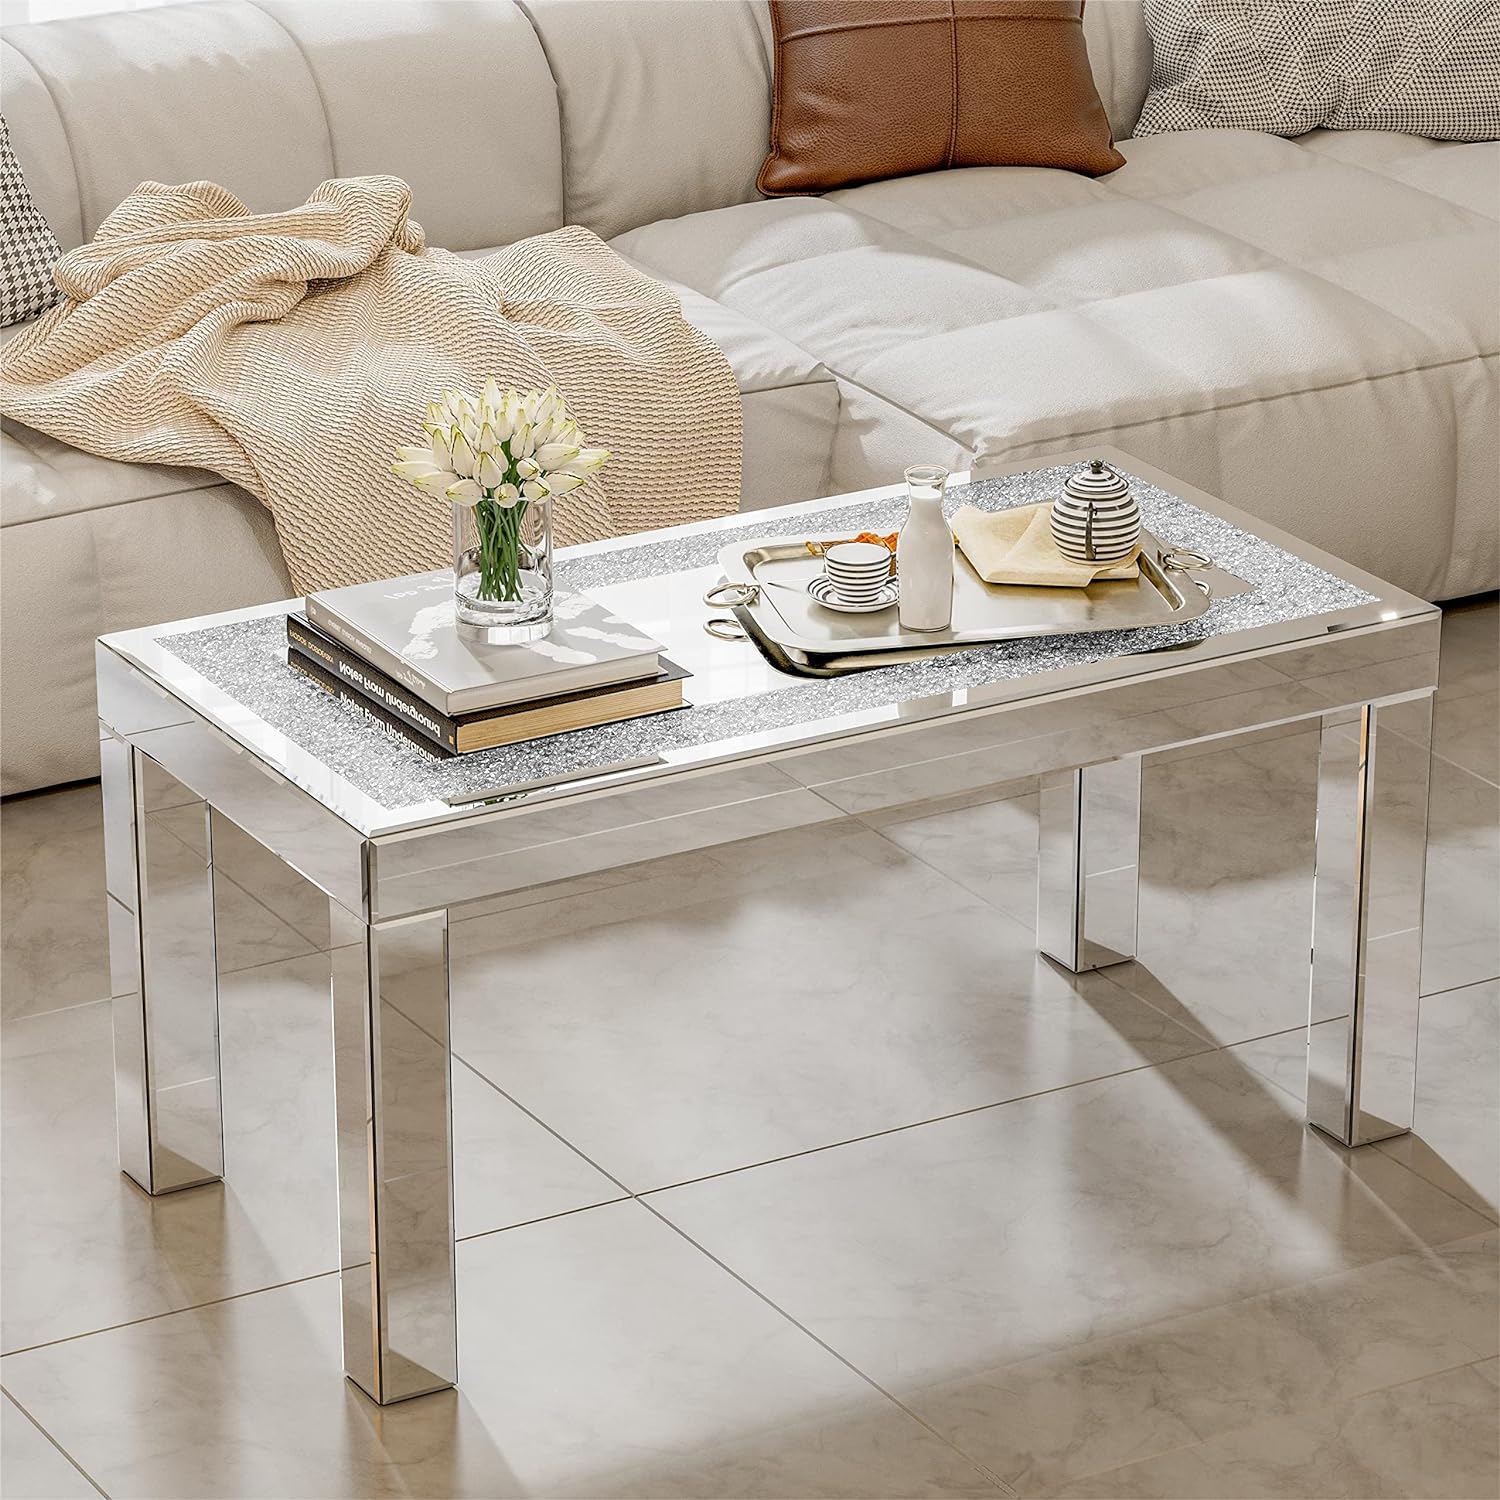 IKIFLY Mirrored Coffee Table with Mirror Crystal Board, Glass Rectangle End Table Coffee Tea Table for Living Room Bedroom